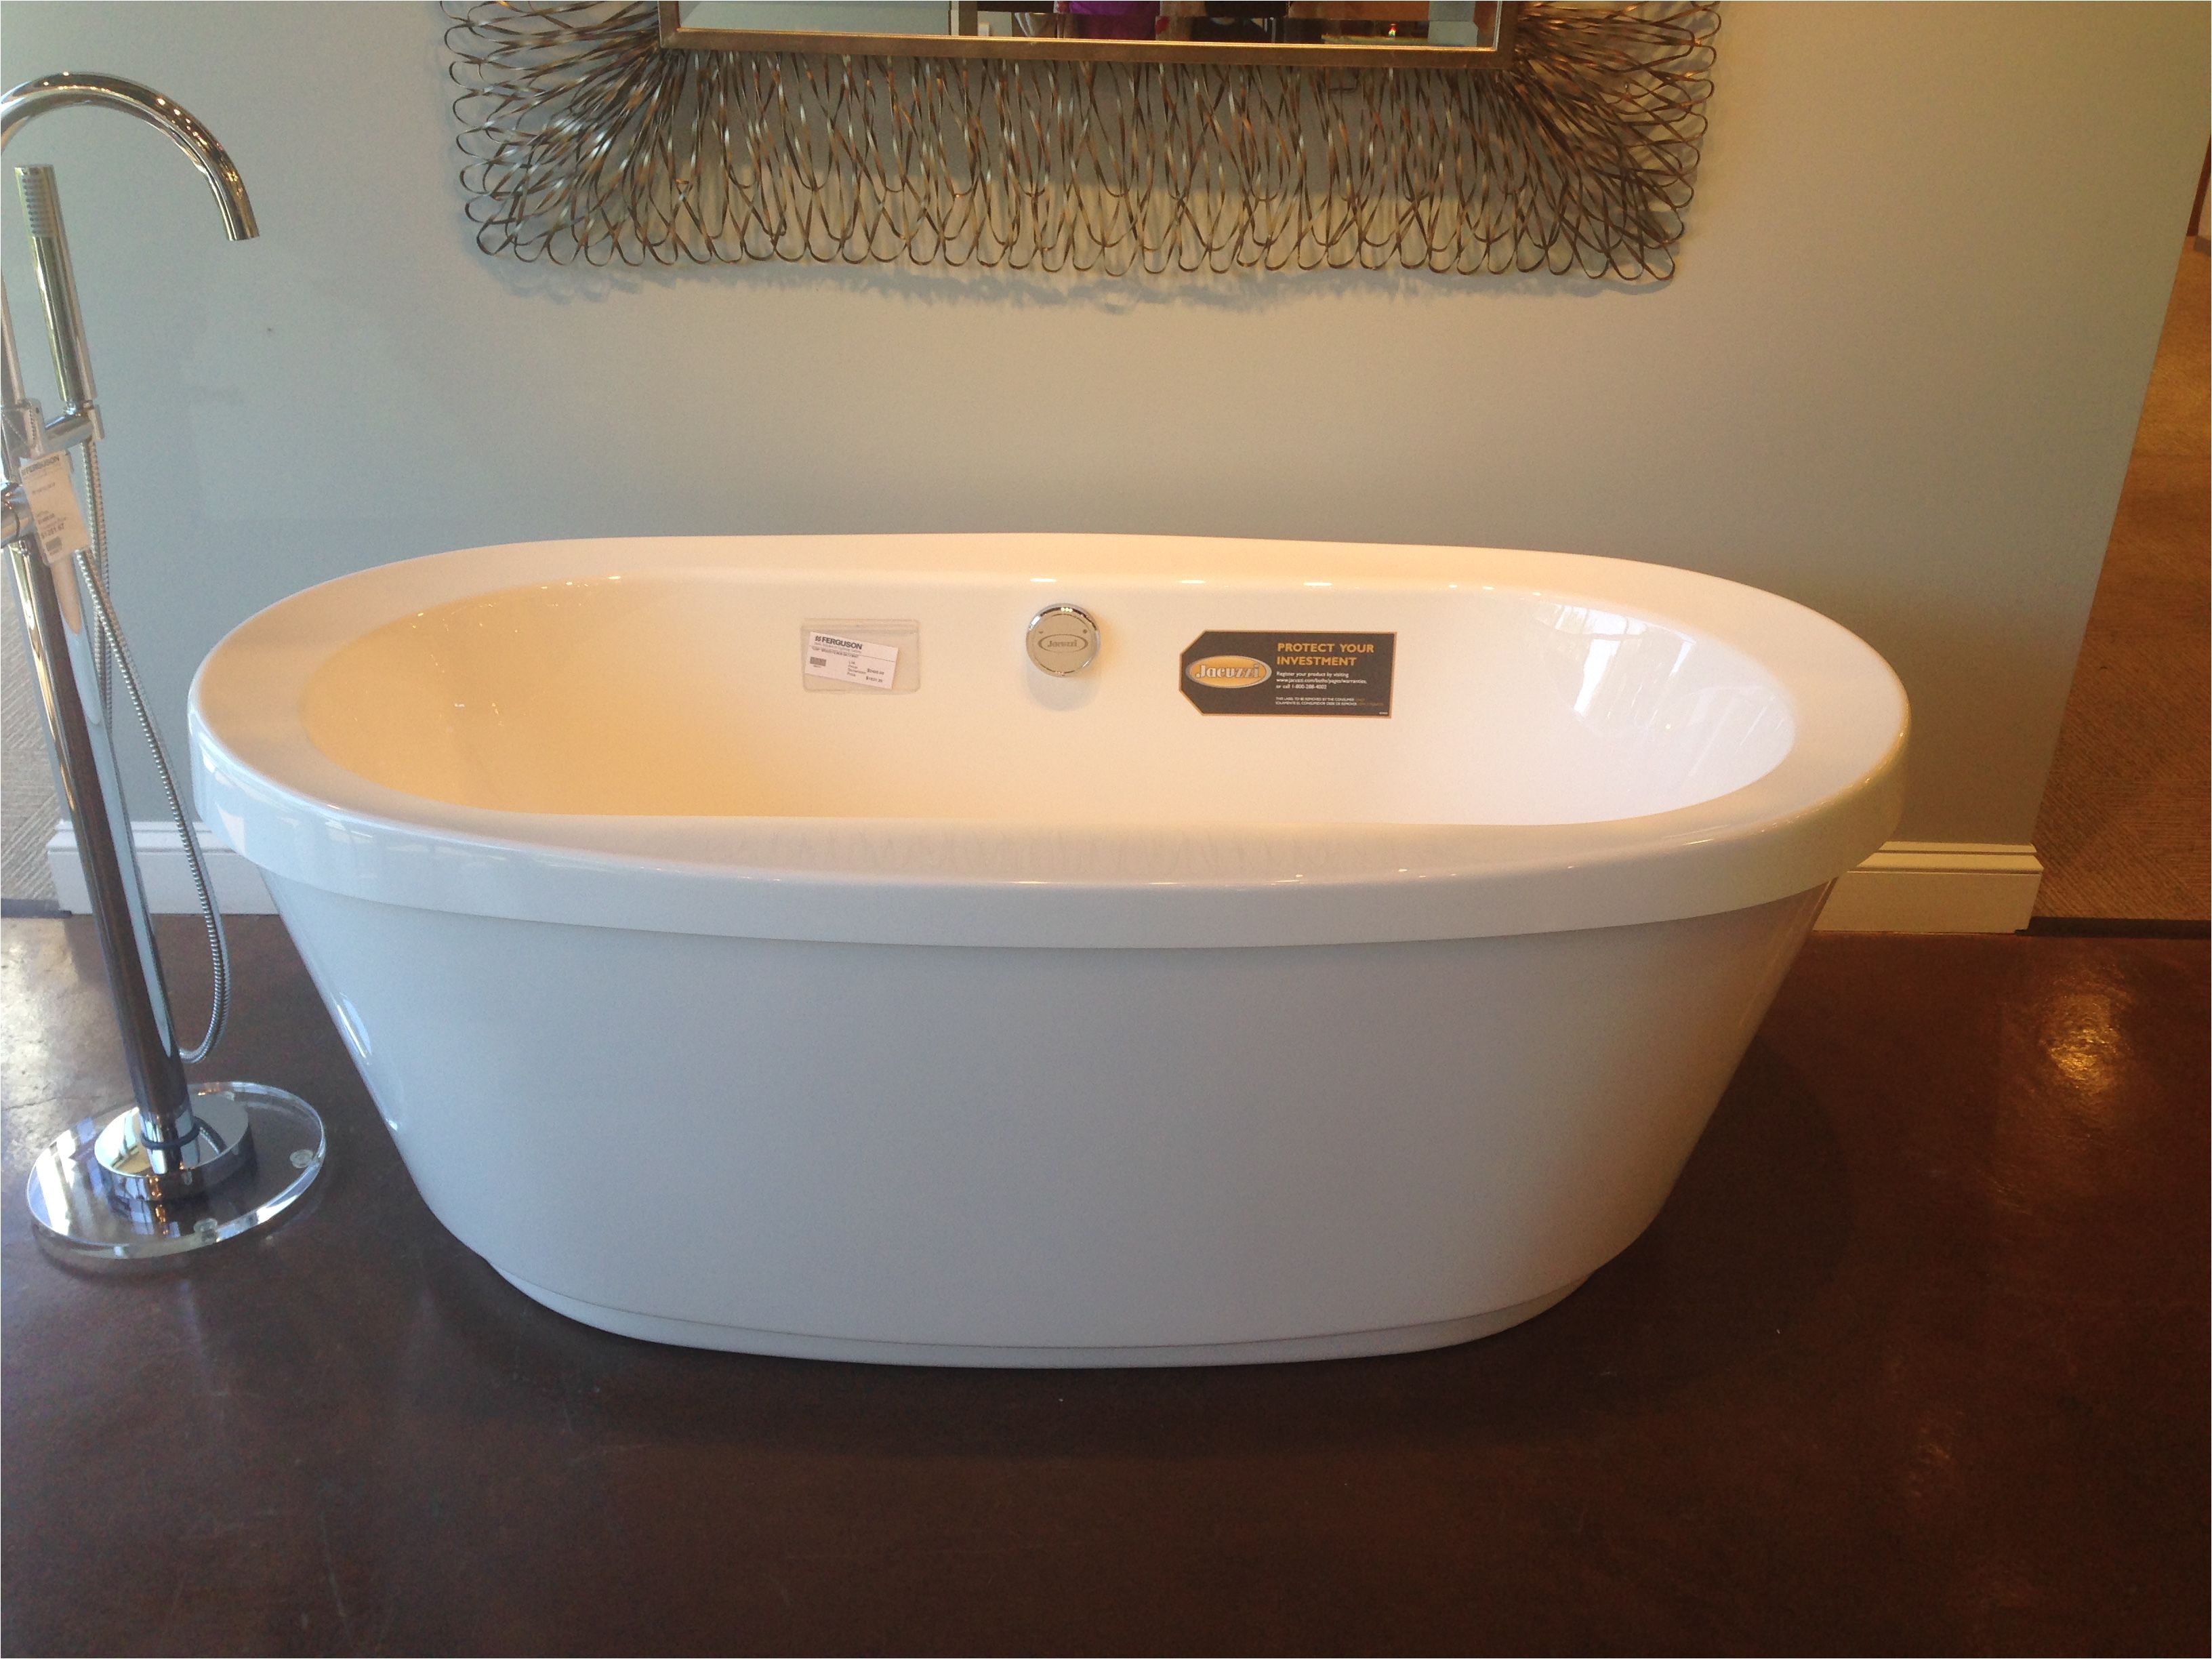 jacuzzi tub from fergusons no jets soaking tub was told it could